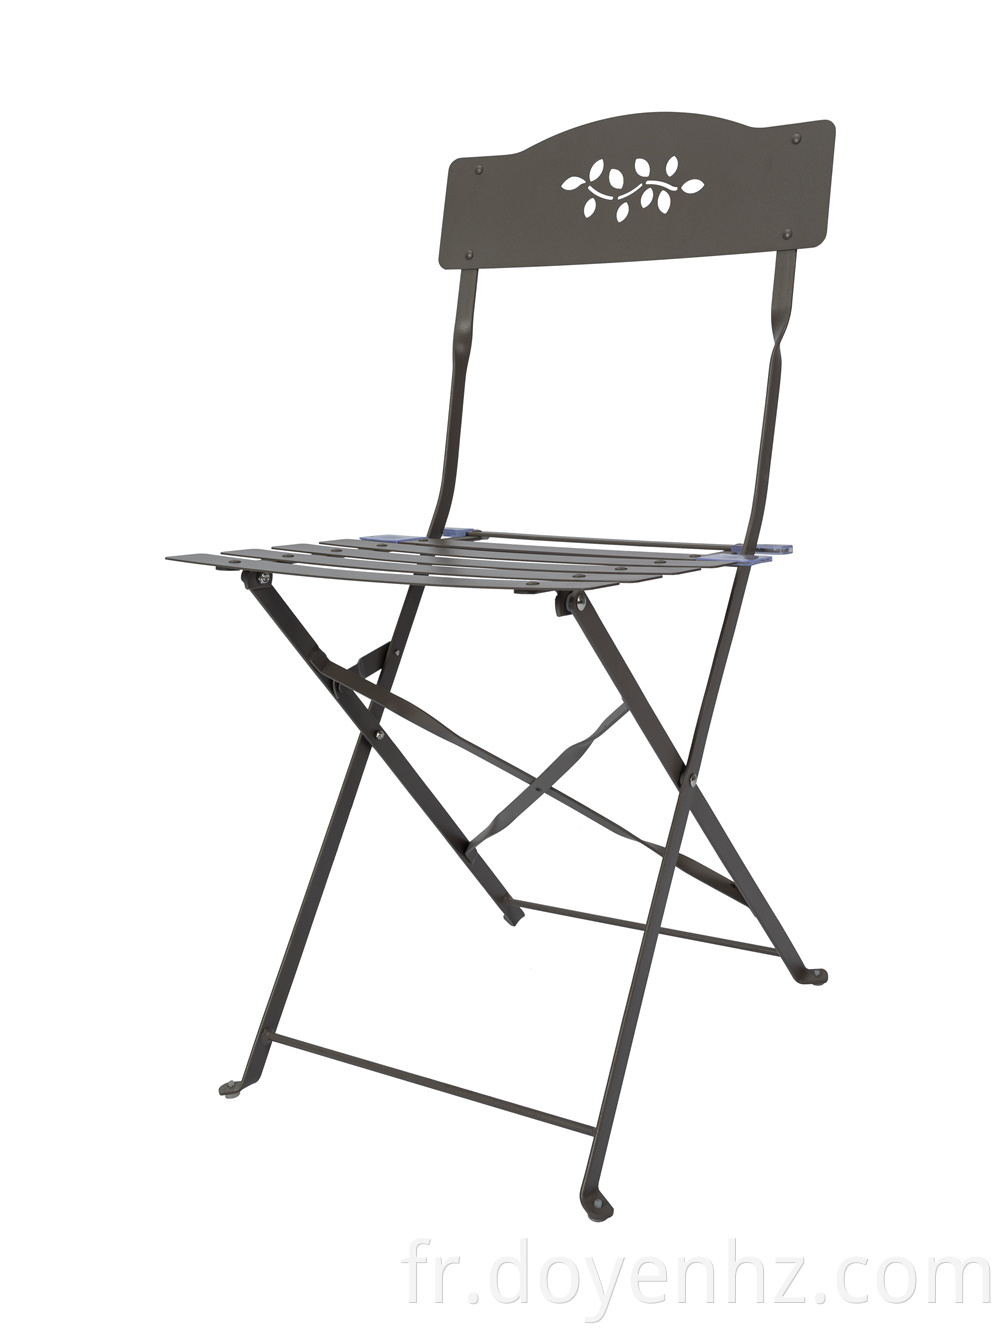 Outdoor Metal Folding Chair with Leaf Pattern Back